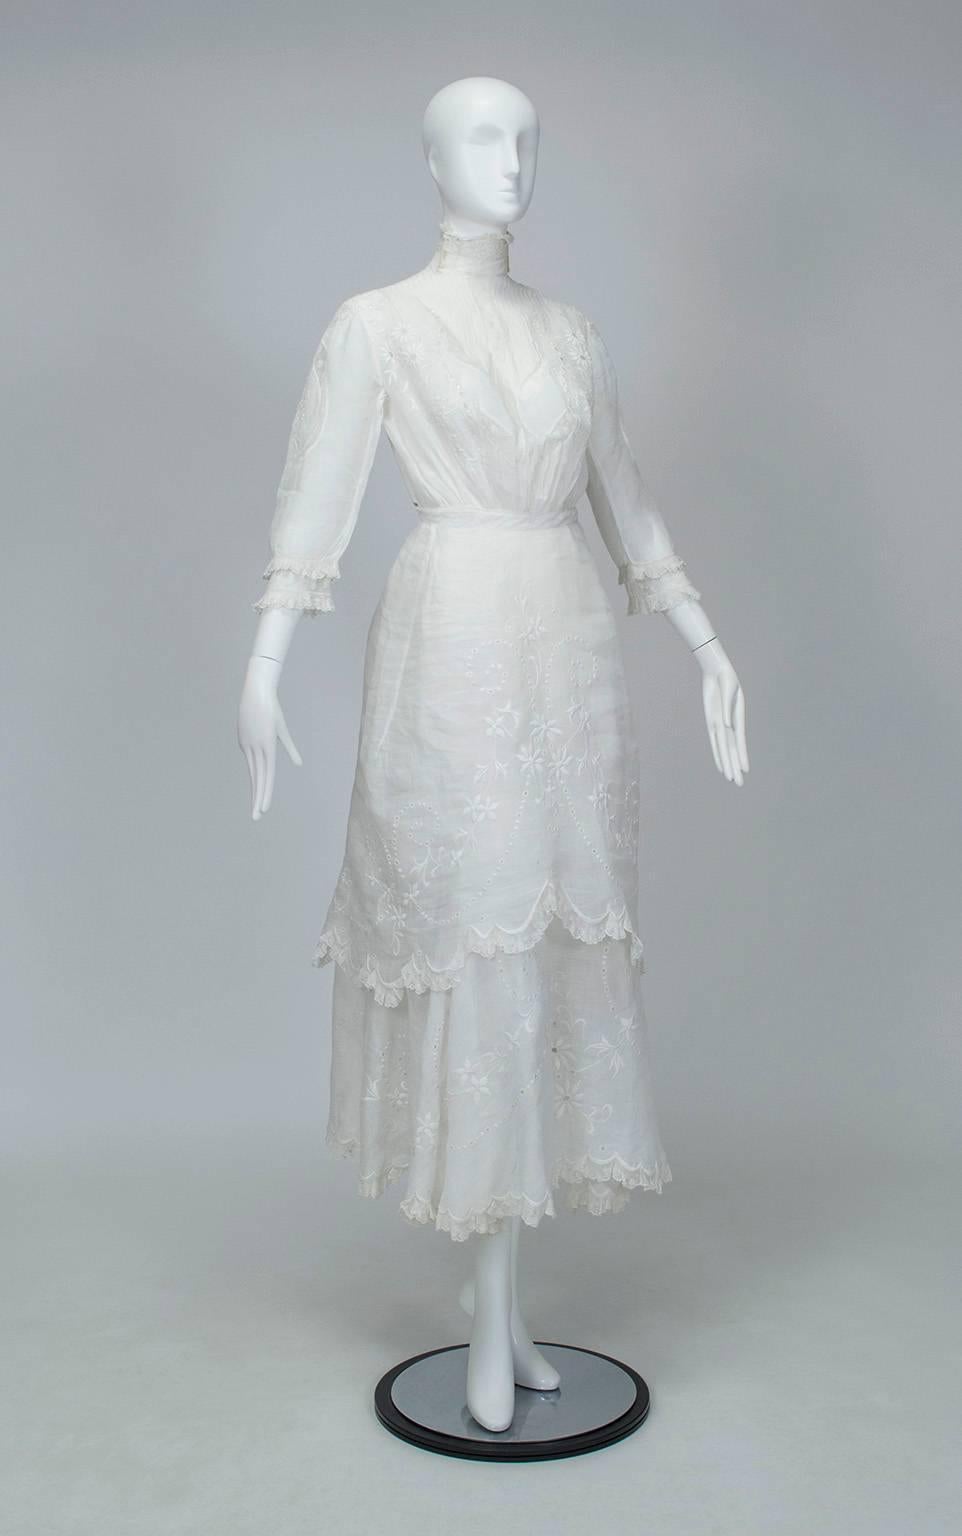 If Downton Abbey had taken place during the Belle Epoque instead of the Edwardian Era, you can bet you would have seen Lady Mary in this dress. A superb example of Victorian summer fashion and a sartorial work of art in near mint